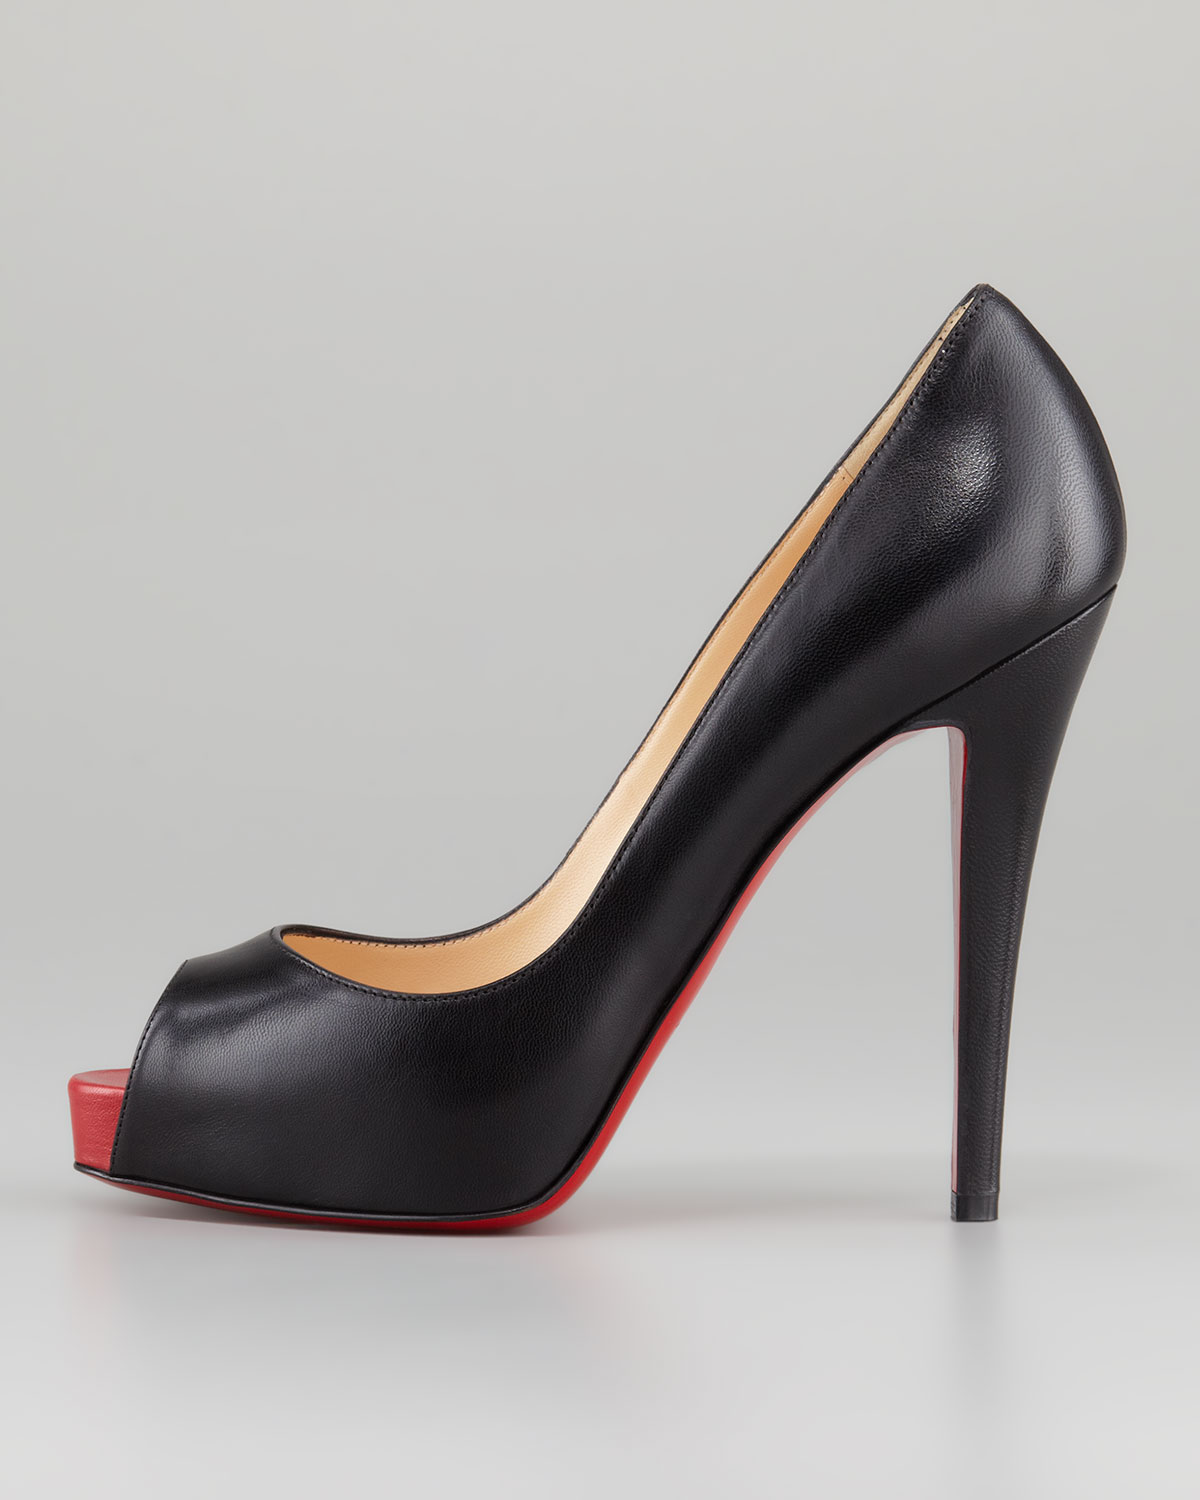 christian-louboutin-blackred-very-prive-leather-platform-red-sole-pump-product-2-11165377-065668098.jpeg